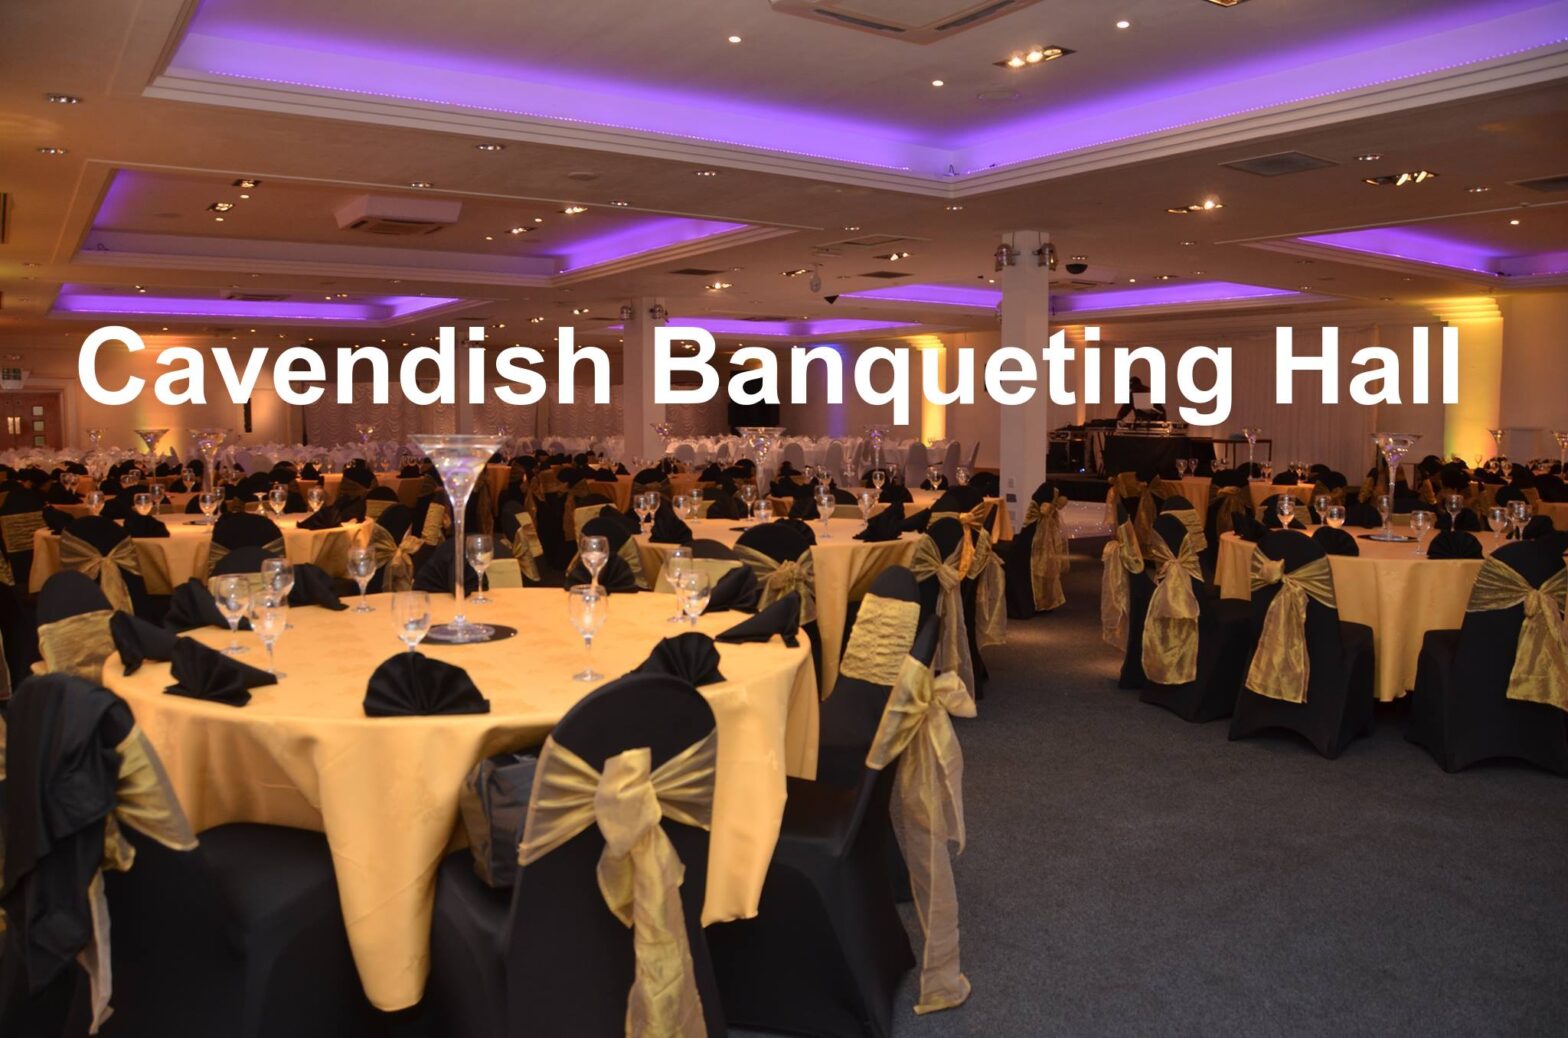 Cavendish Banqueting Hall with set up for guests with a DJ booth